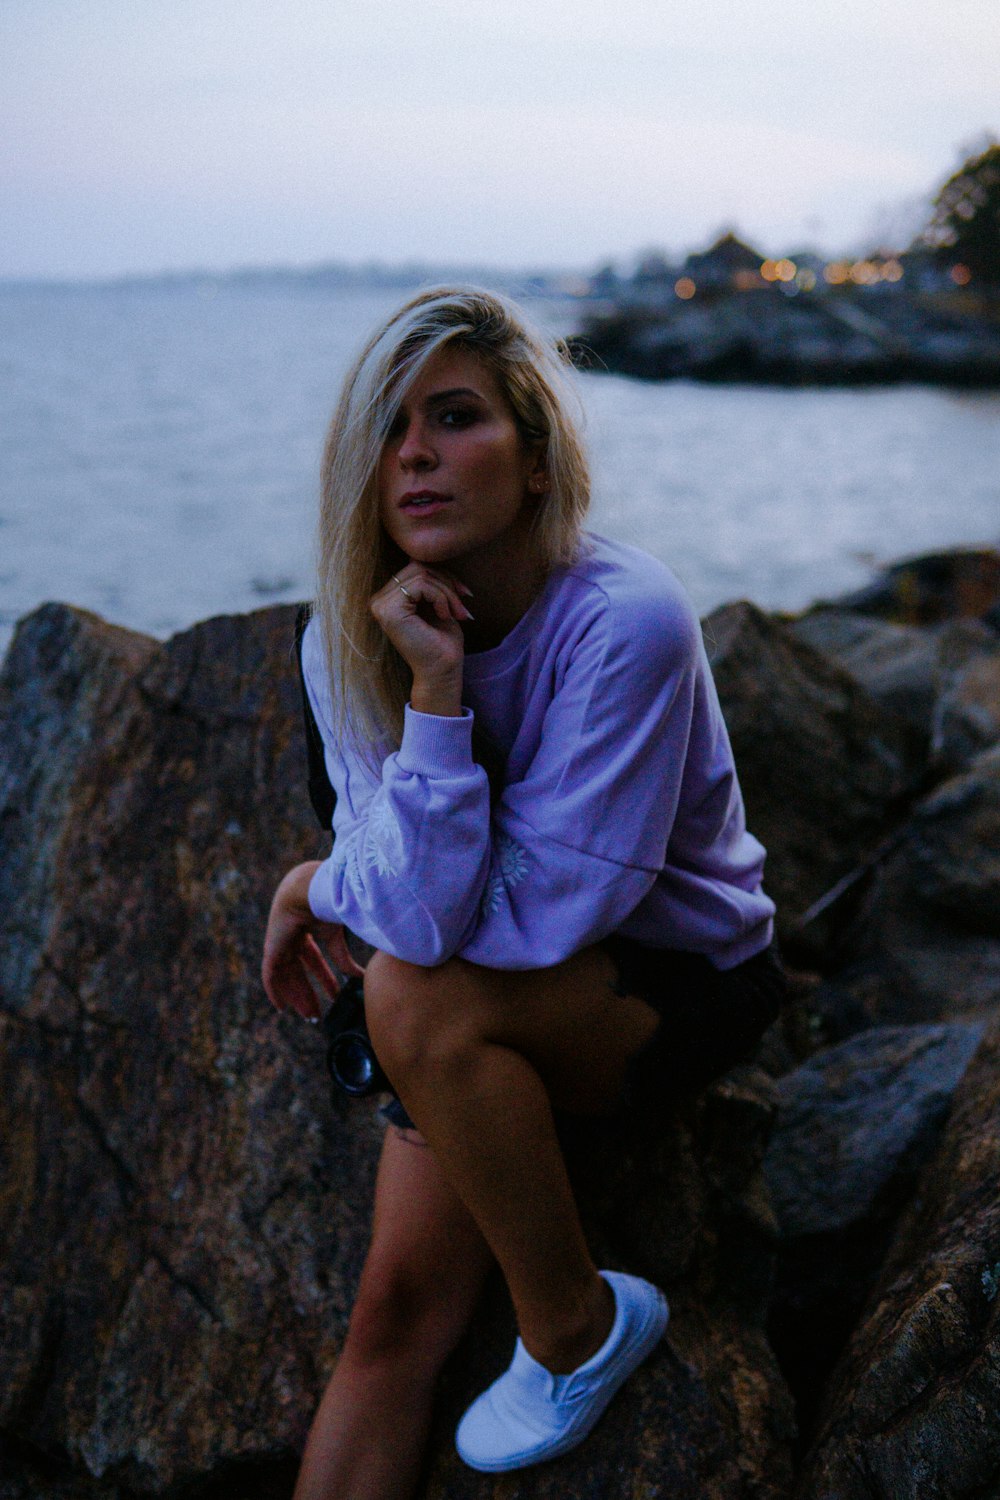 woman in purple long sleeve shirt sitting on rock near body of water during daytime